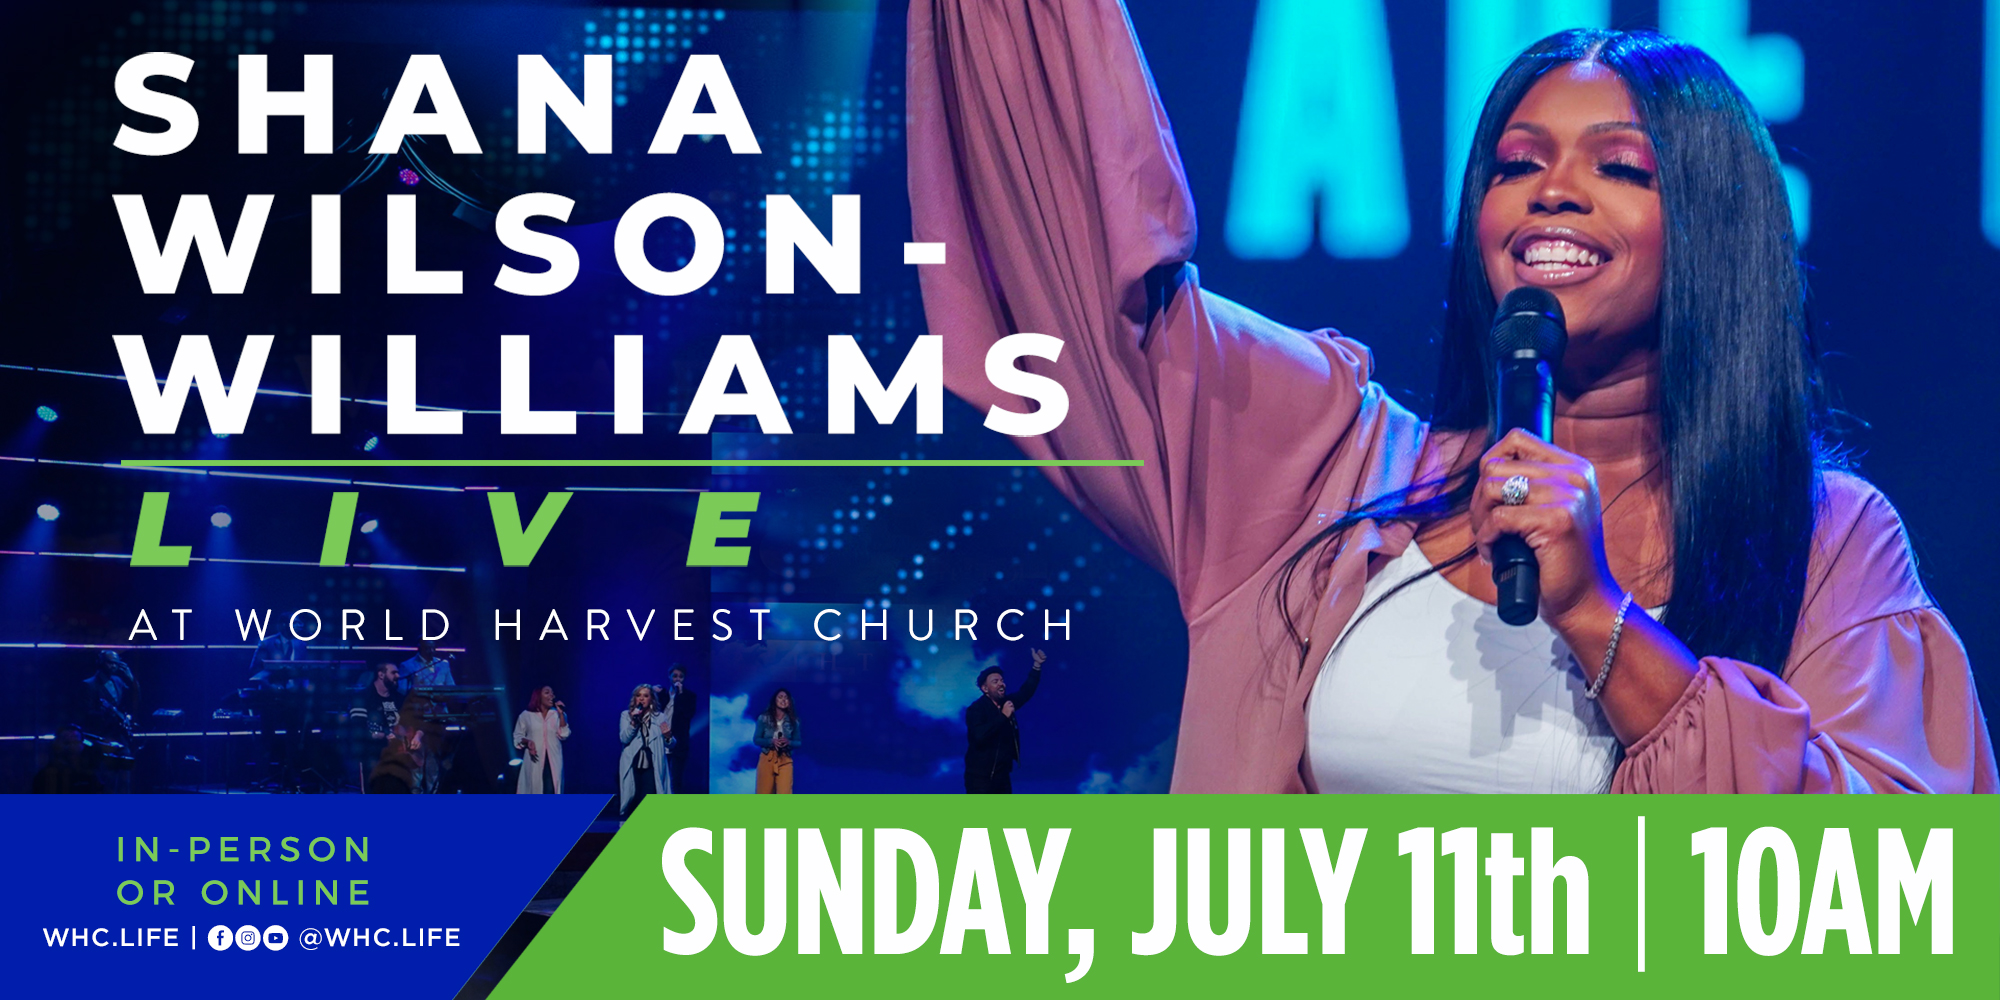 Shana Wilson-Williams Live at World Harvest Church In-Person or Online whc.life facebook youtube instagram @whc.life Sunday, July 11 10am